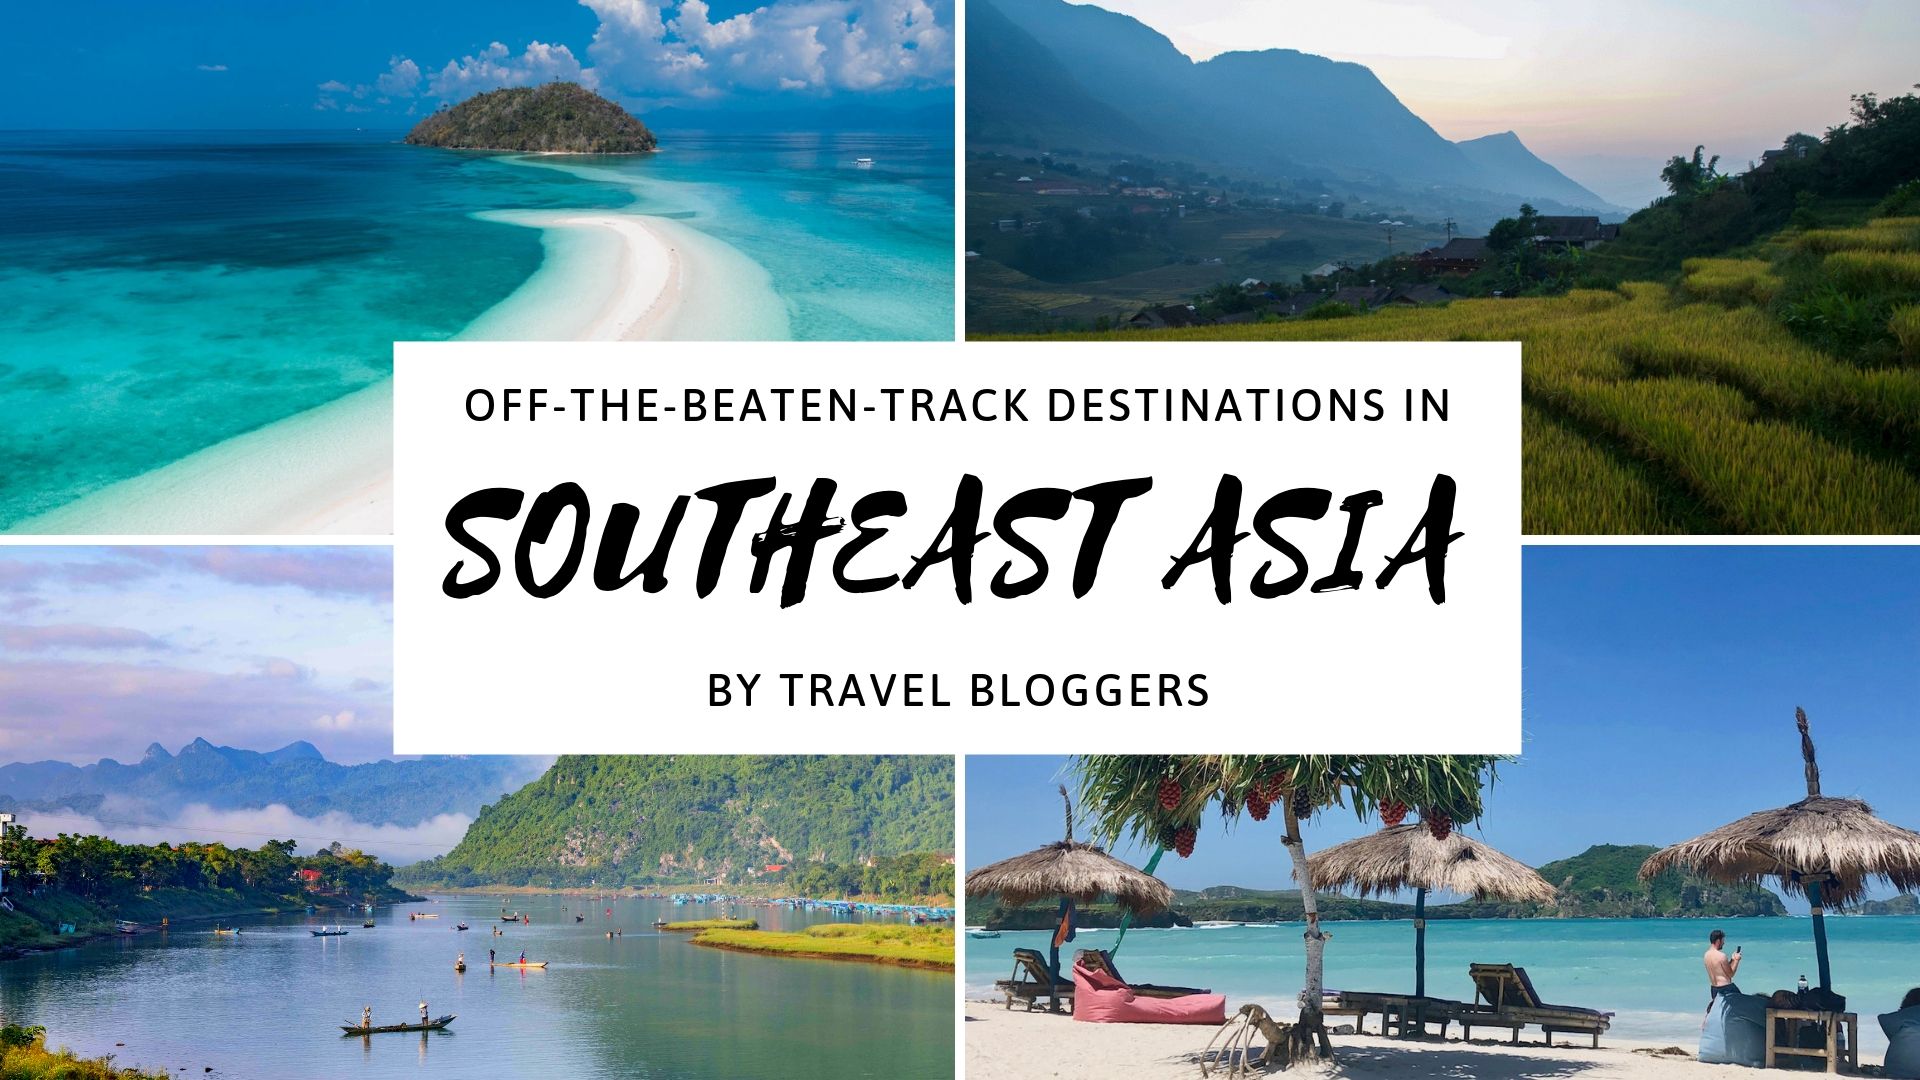 Off-The-Beaten-Track Destinations in Southeast Asia for Backpackers